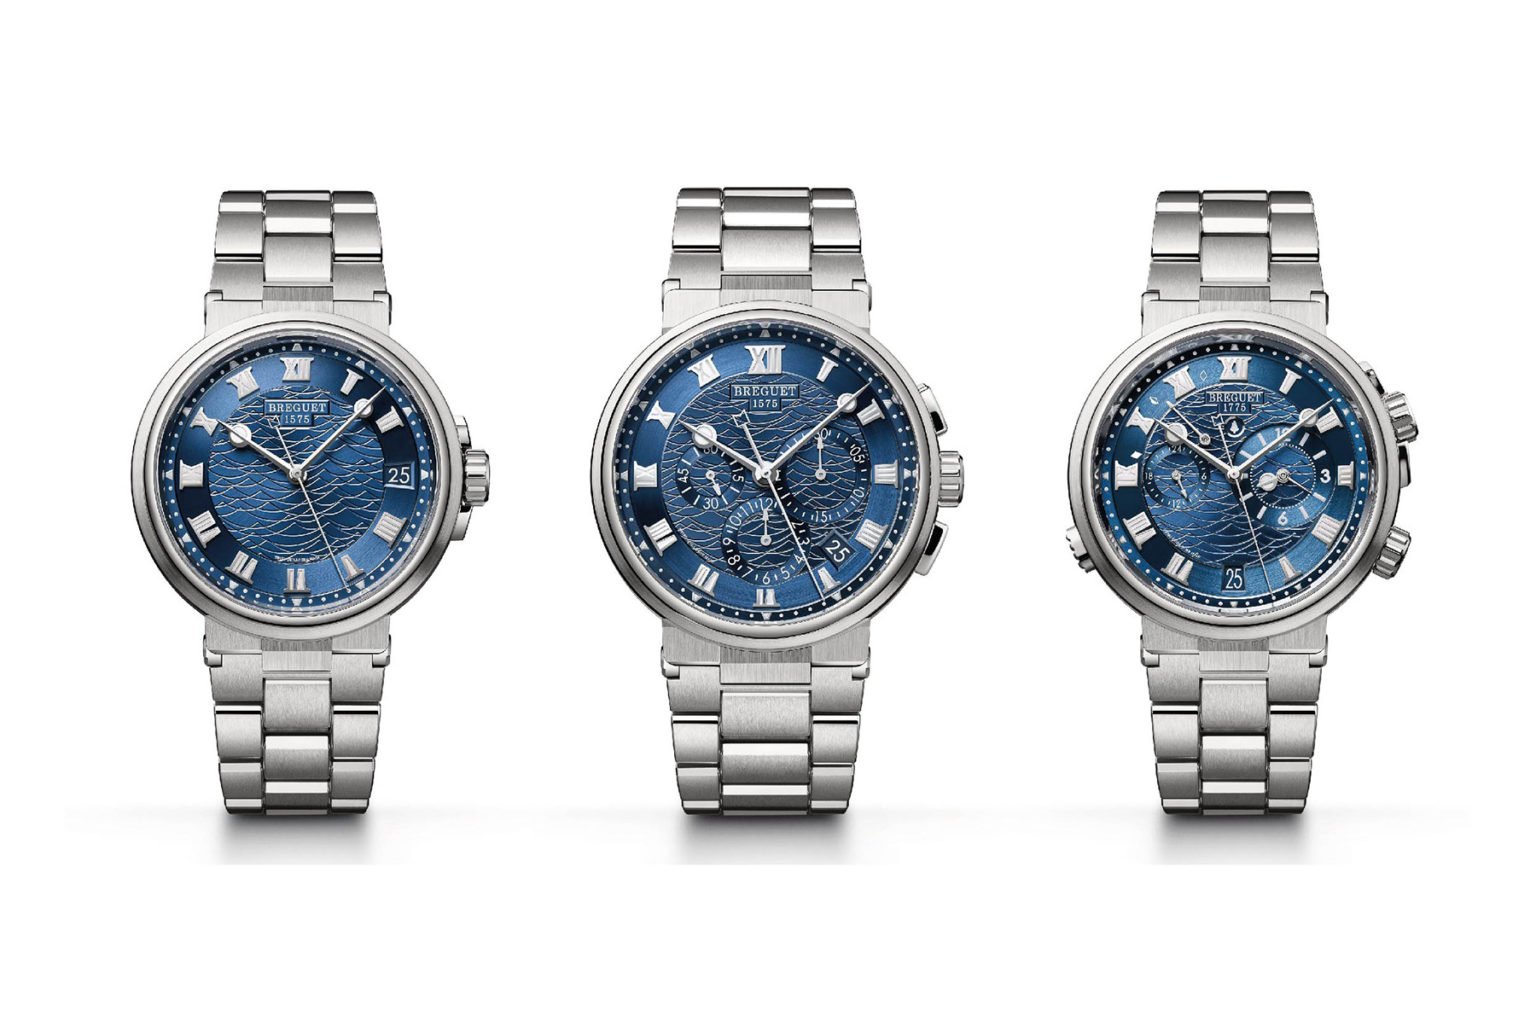 Breguet Further Expands The Marine Collection With Six New Watches